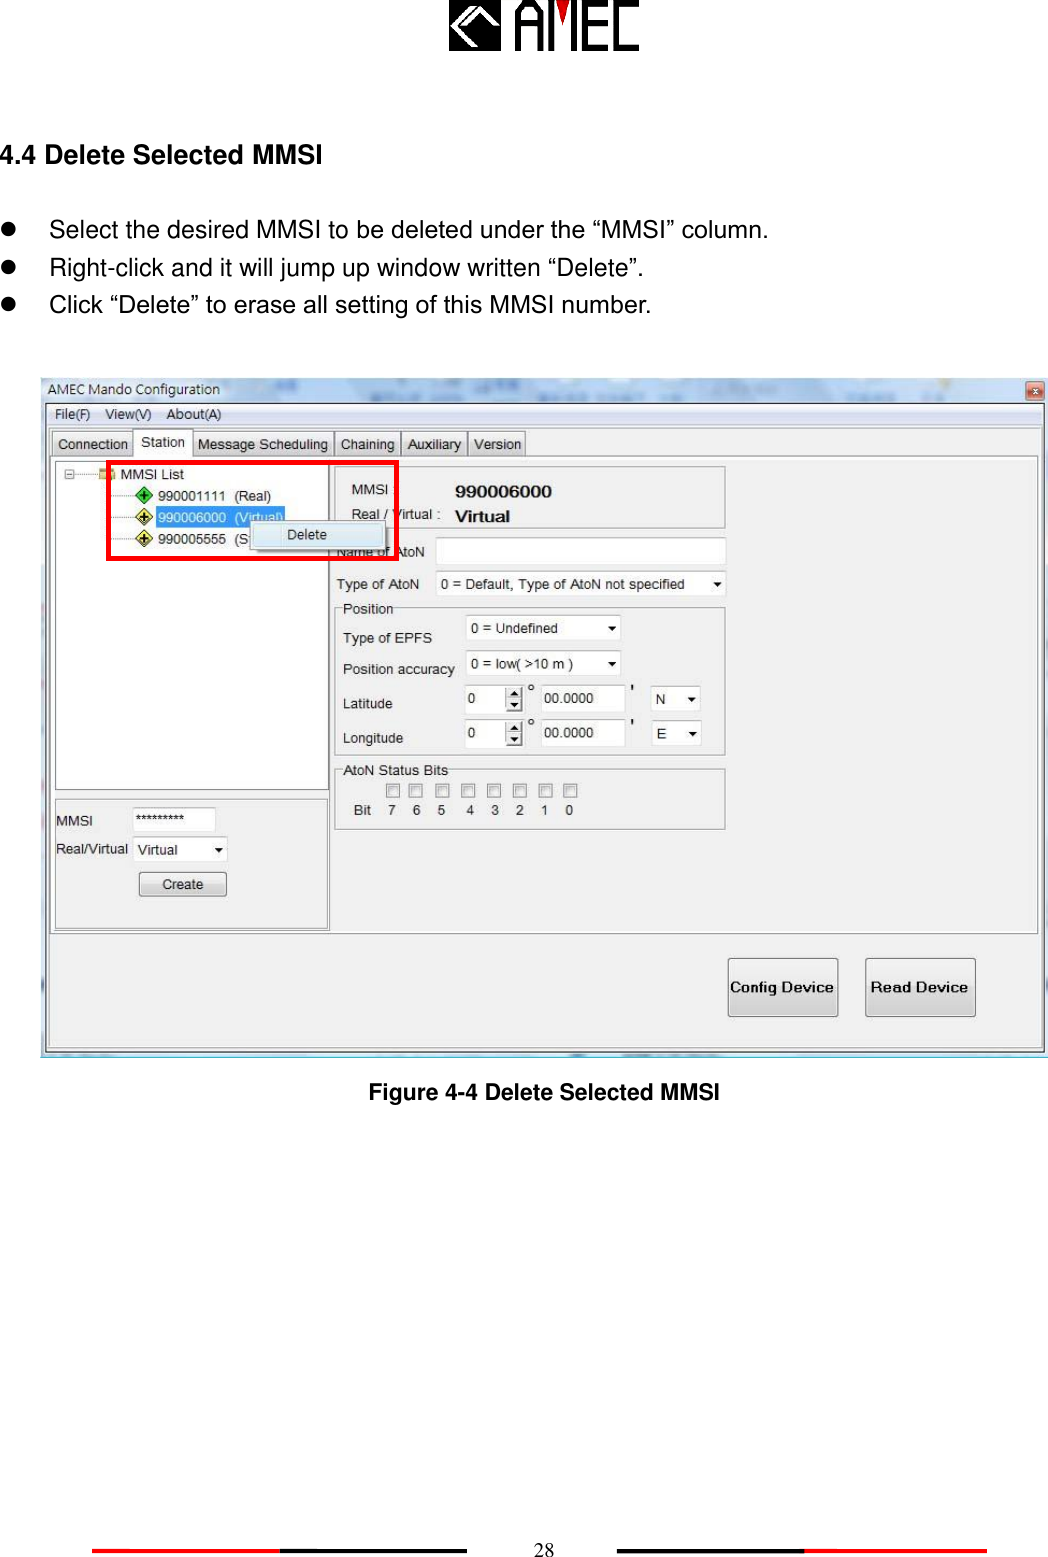    28 4.4 Delete Selected MMSI   Select the desired MMSI to be deleted under the “MMSI” column.   Right-click and it will jump up window written “Delete”.    Click “Delete” to erase all setting of this MMSI number.   Figure 4-4 Delete Selected MMSI 